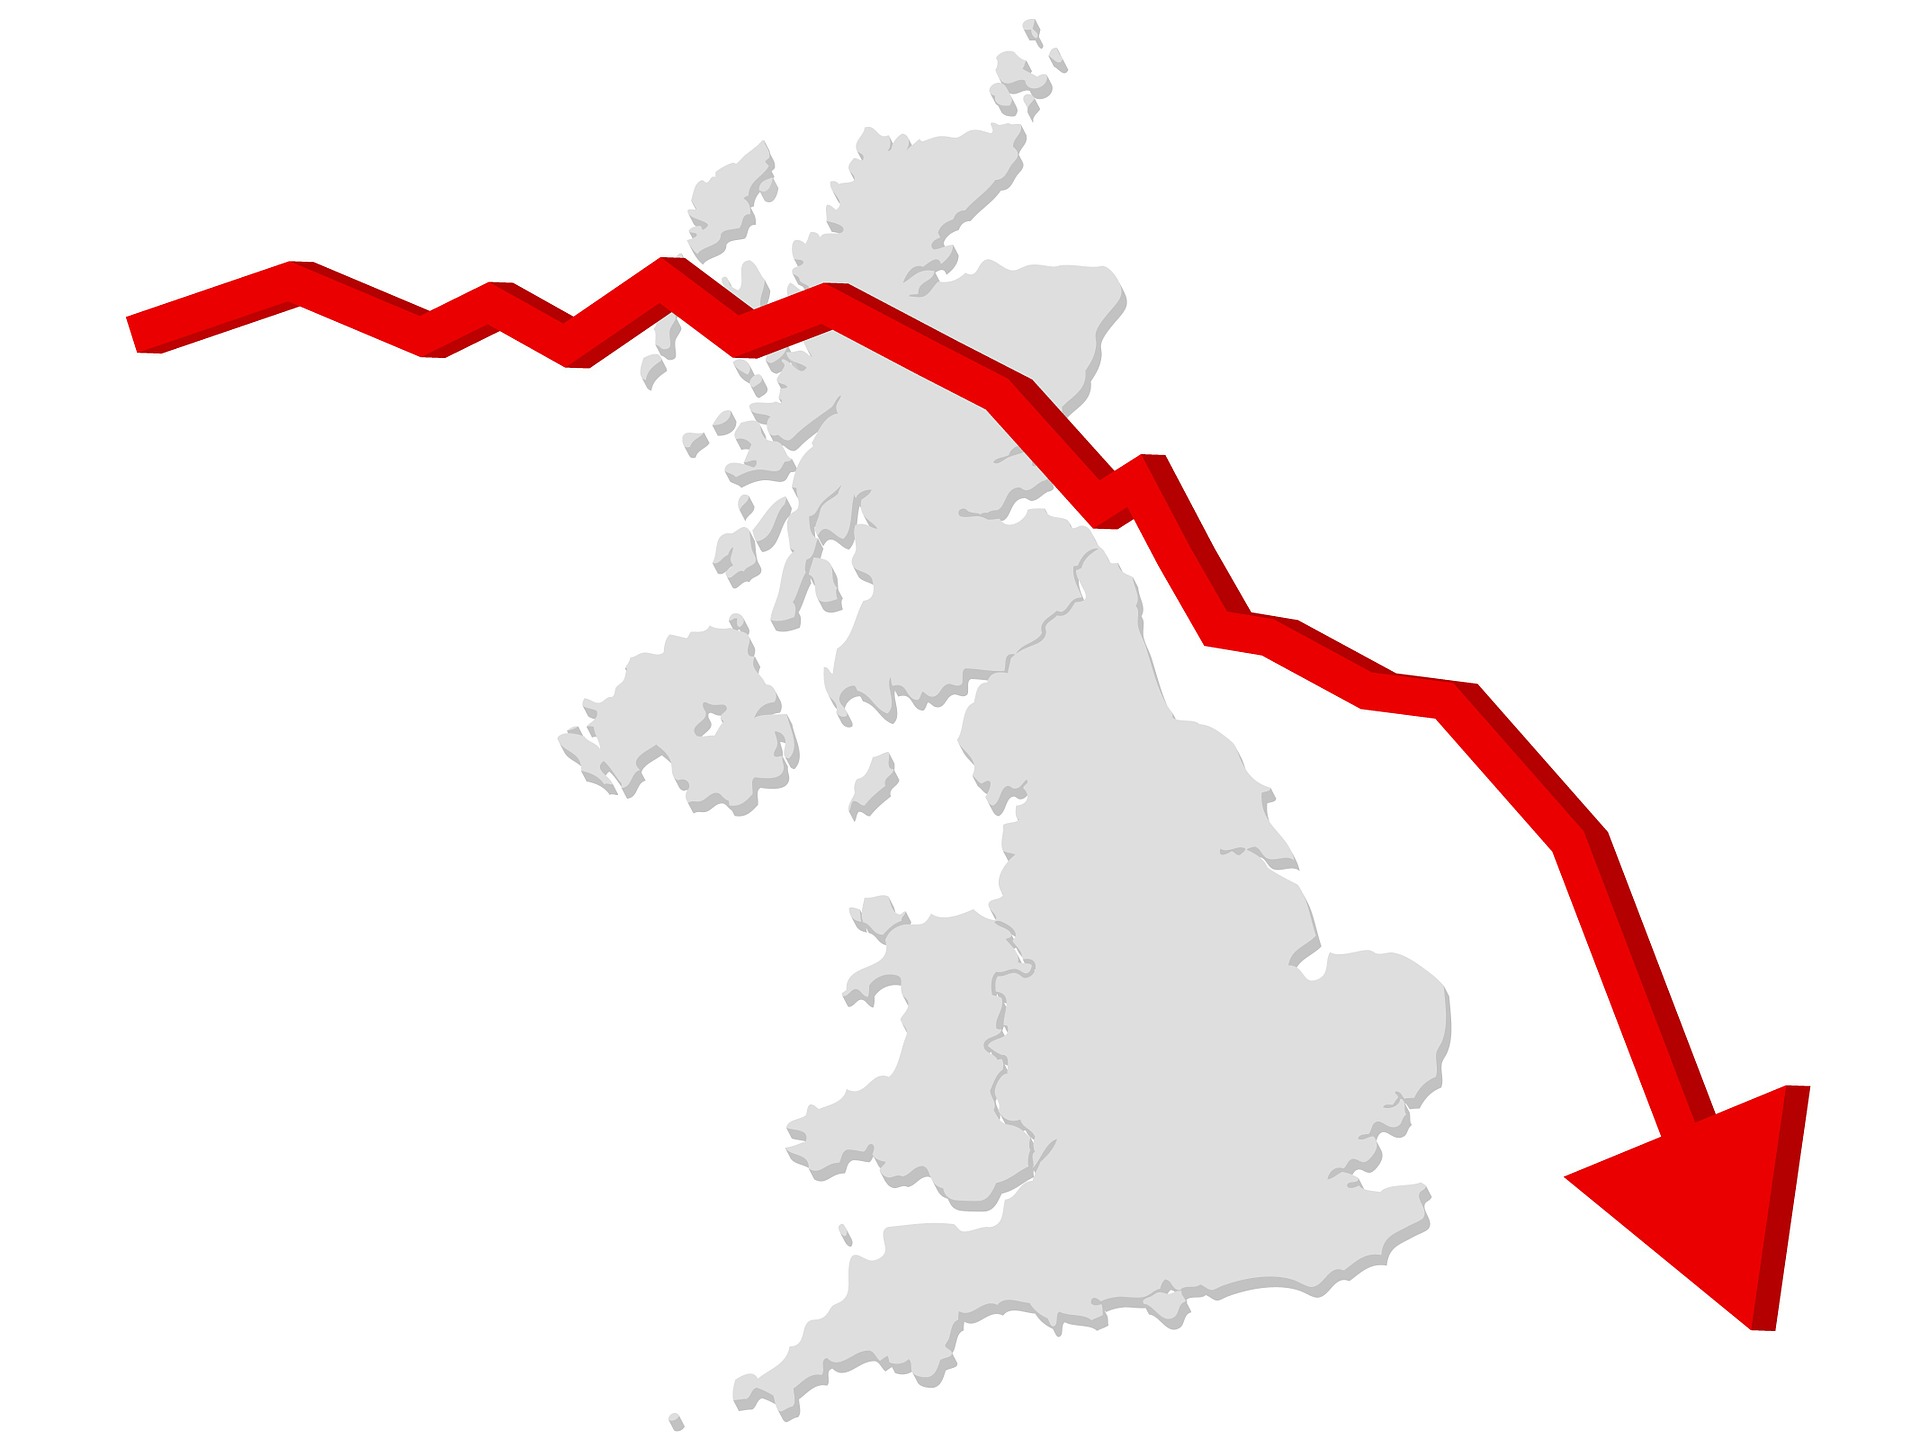 property-industry-reacts-to-fall-in-uk-house-prices